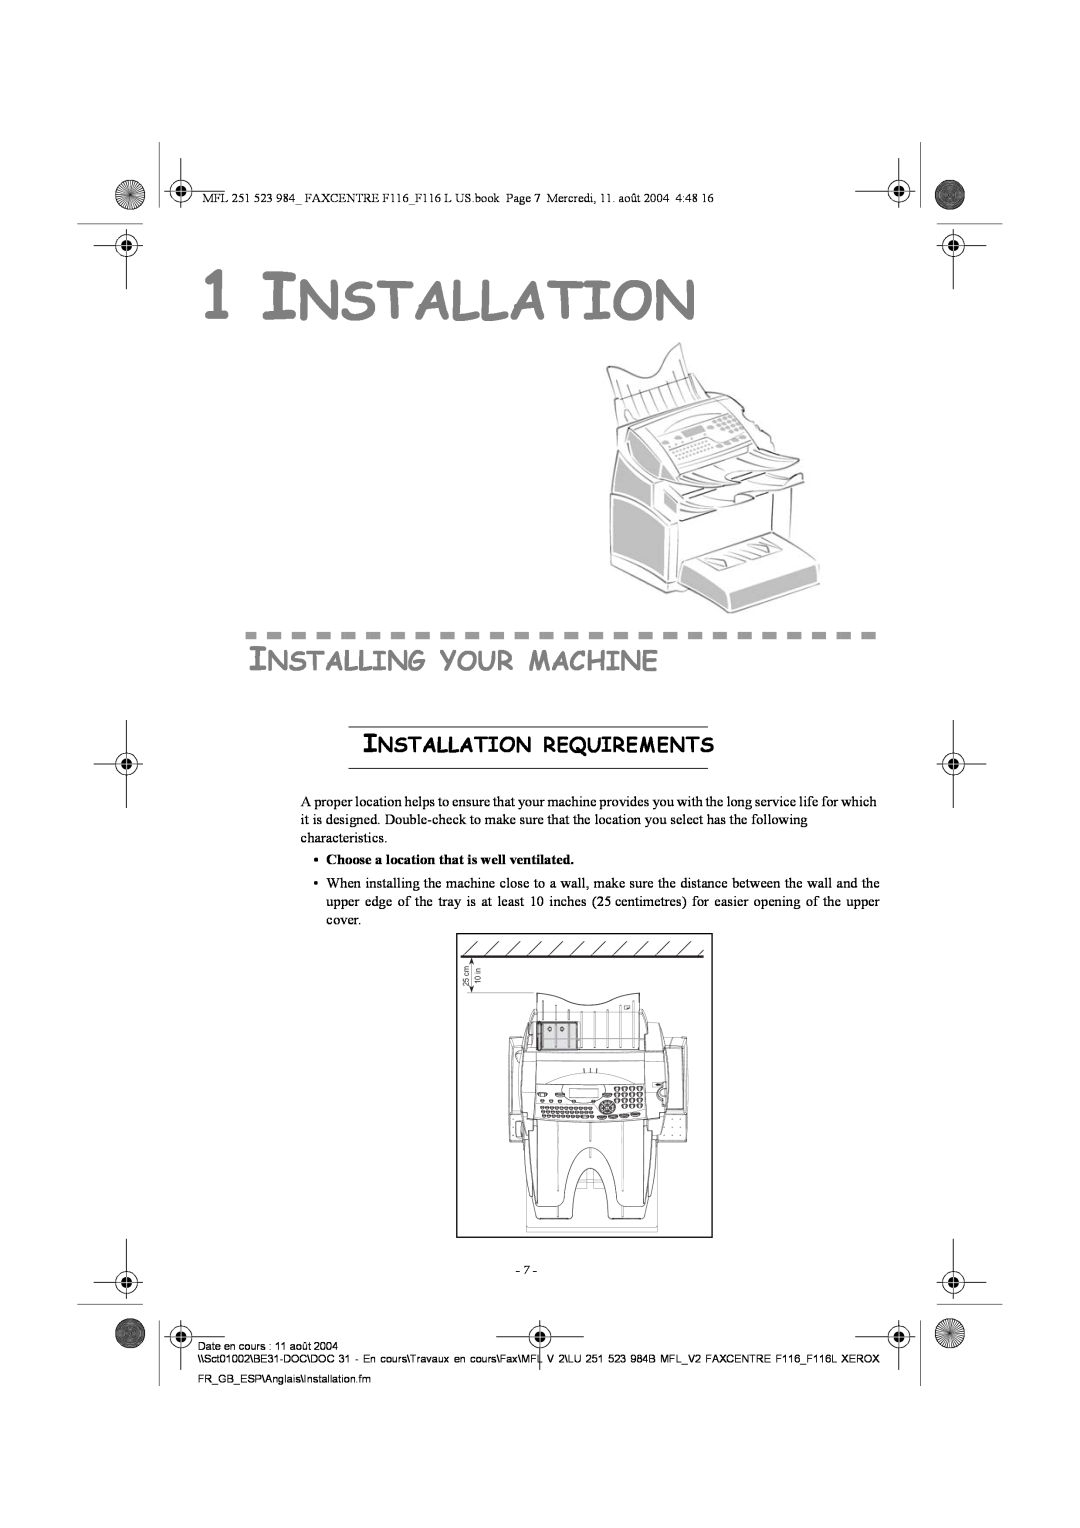 Xerox F116 1INSTALLATION, Installing Your Machine, Installation Requirements, •Choose a location that is well ventilated 